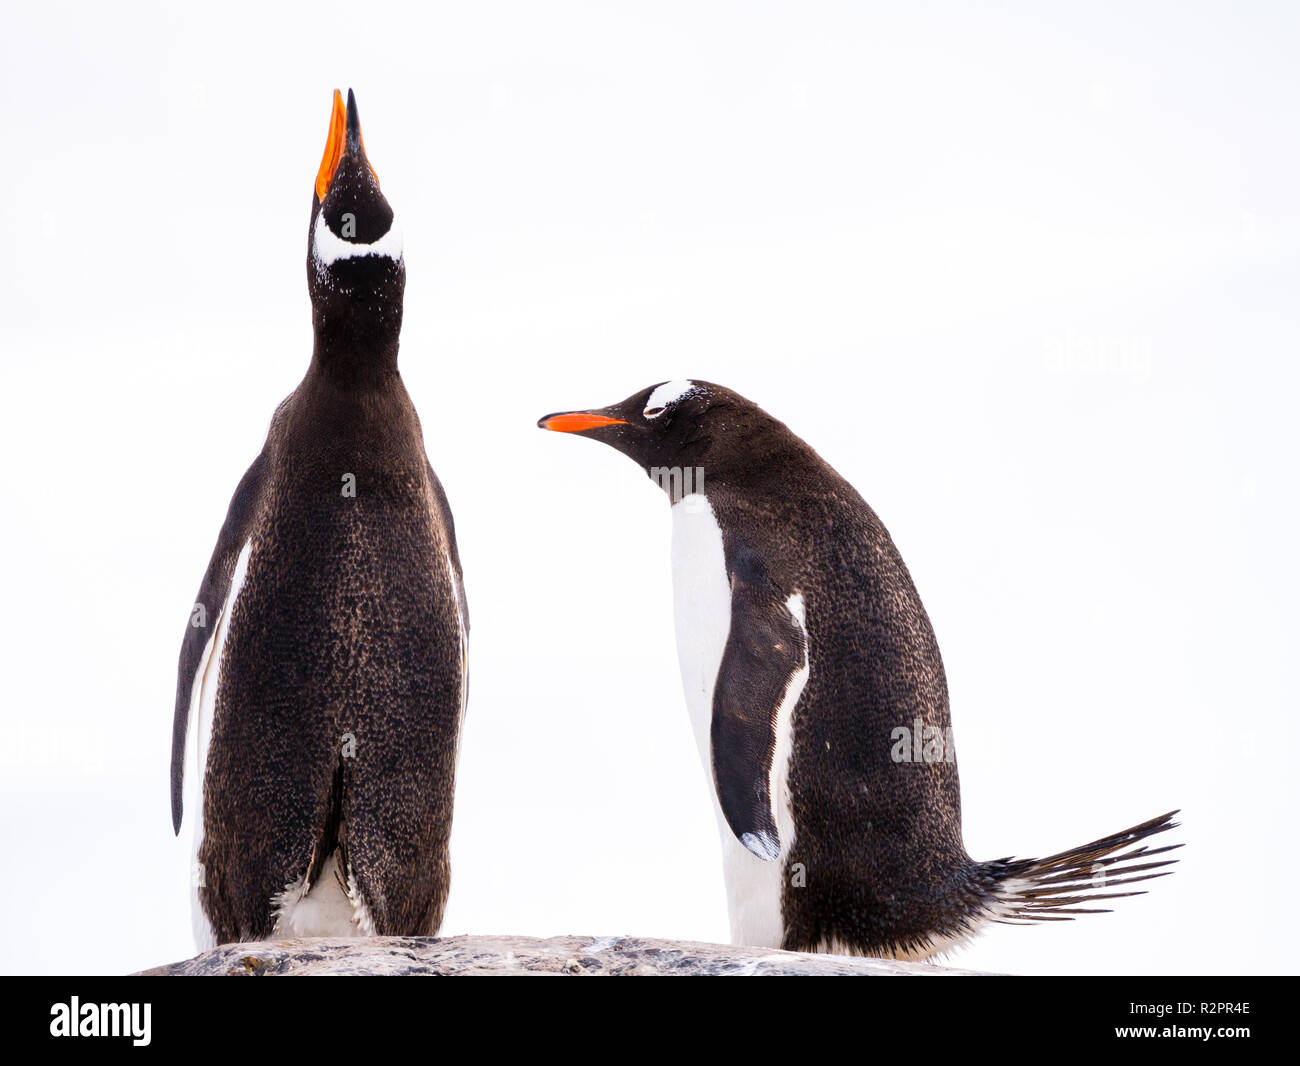 Pair of Gentoo penguins, Pygoscelis papua, side by side, one calling and one bowing, Mikkelsen Harbour, Trinity Island, Antarctic Peninsula, Antarctic Stock Photo